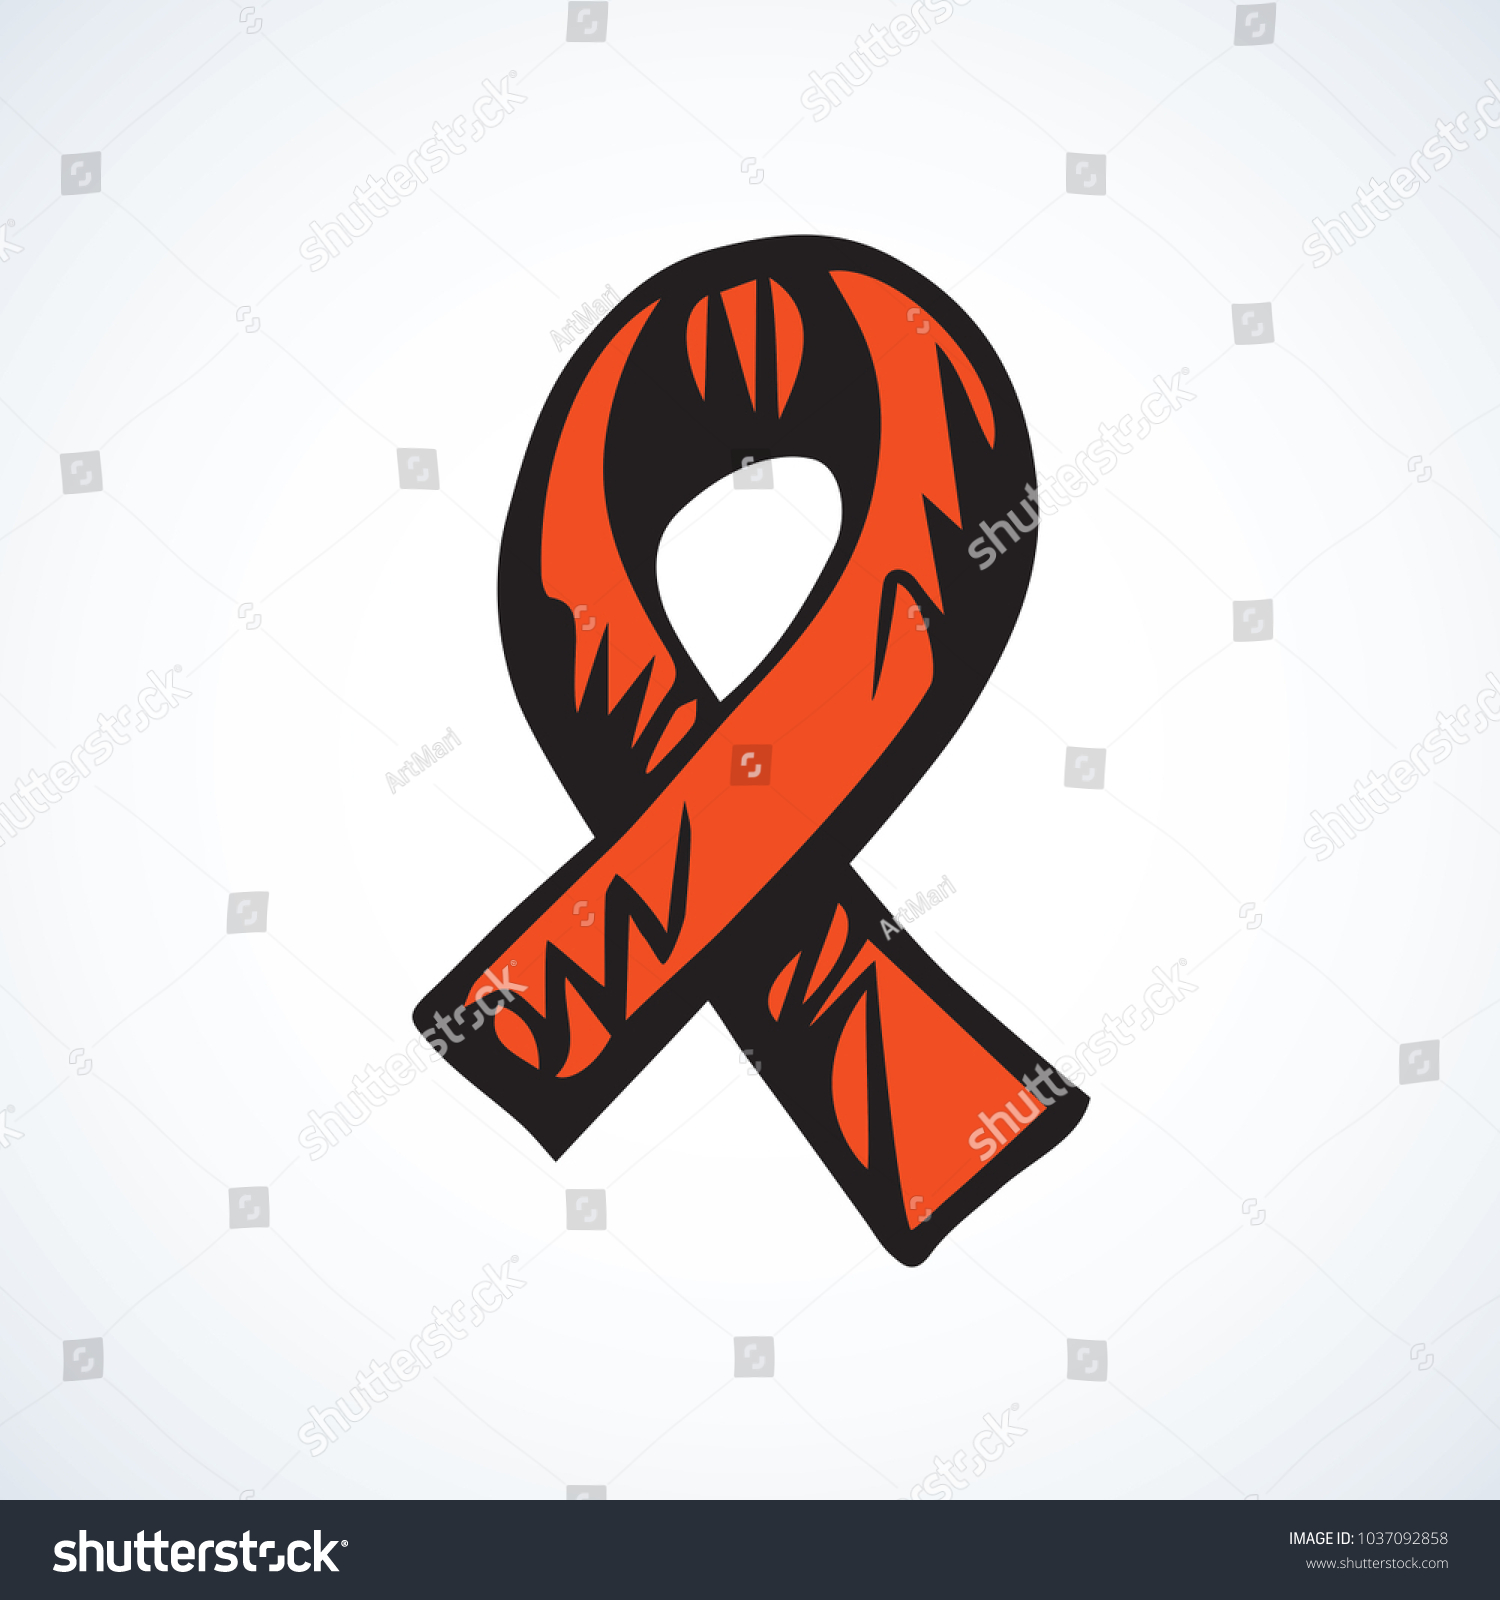 logo bow unity human immunodeficiency isolated stock vector royalty free 1037092858